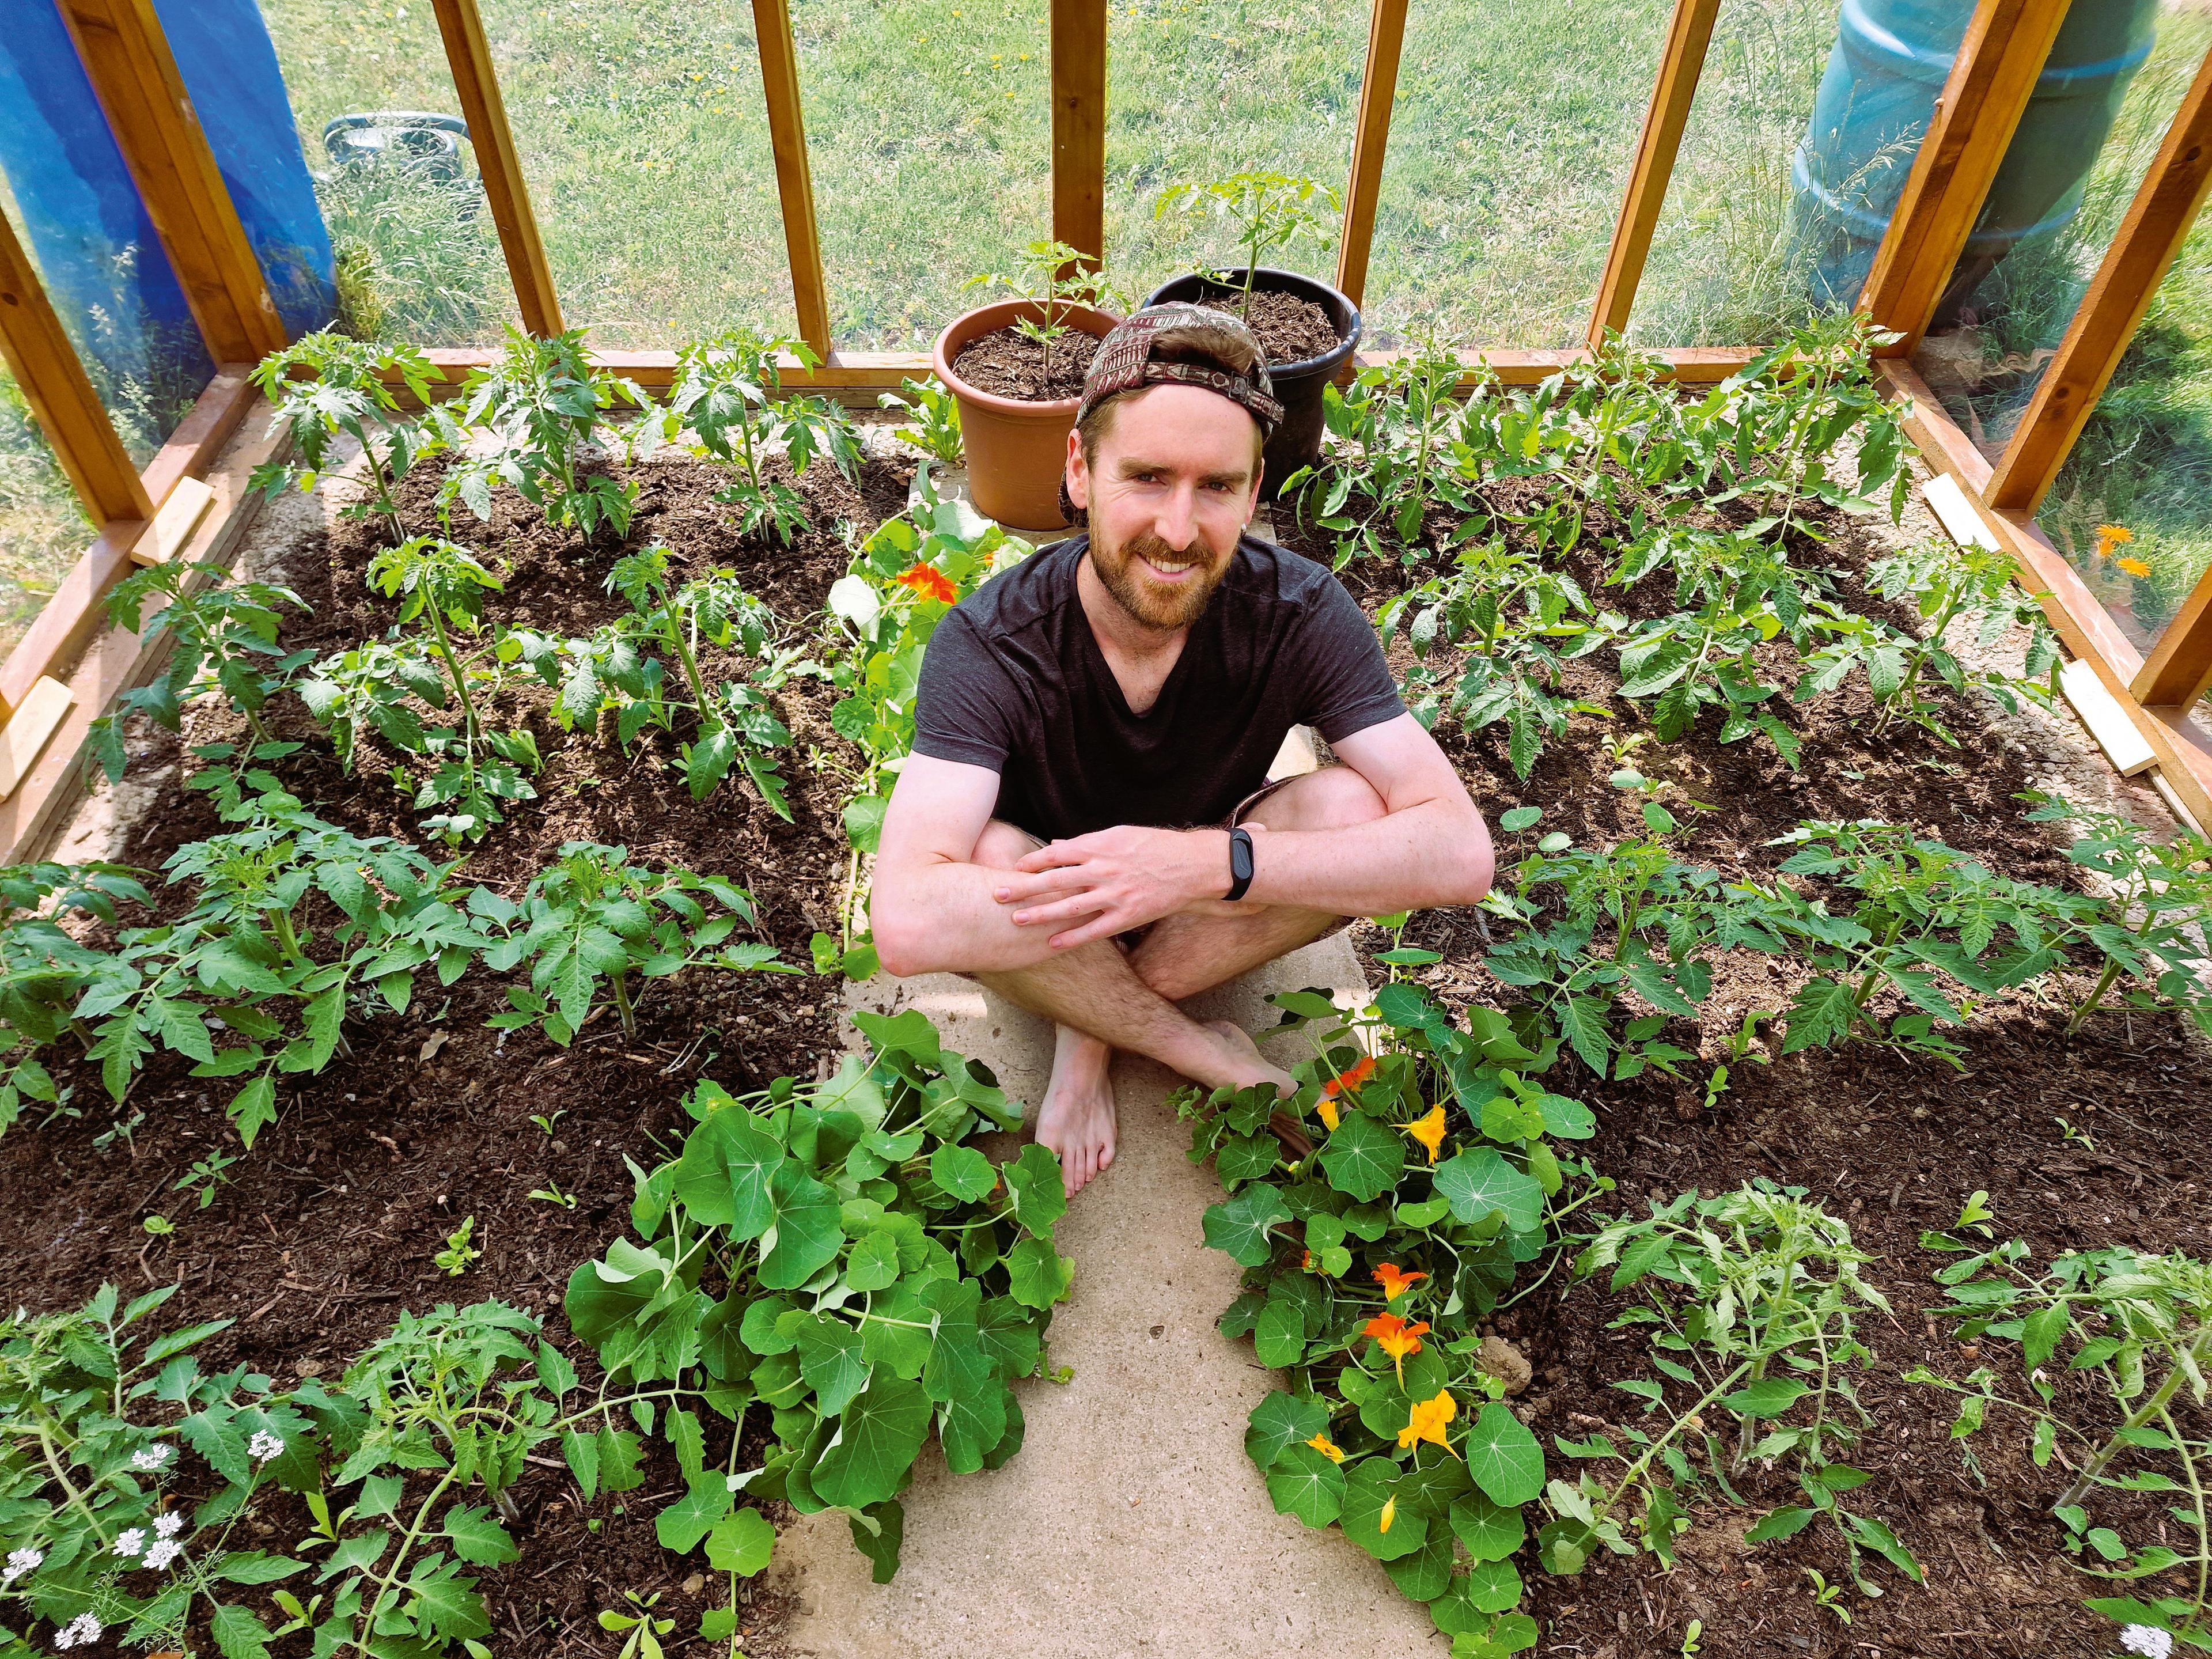 David Spencer sits on the ground in his greenhouse